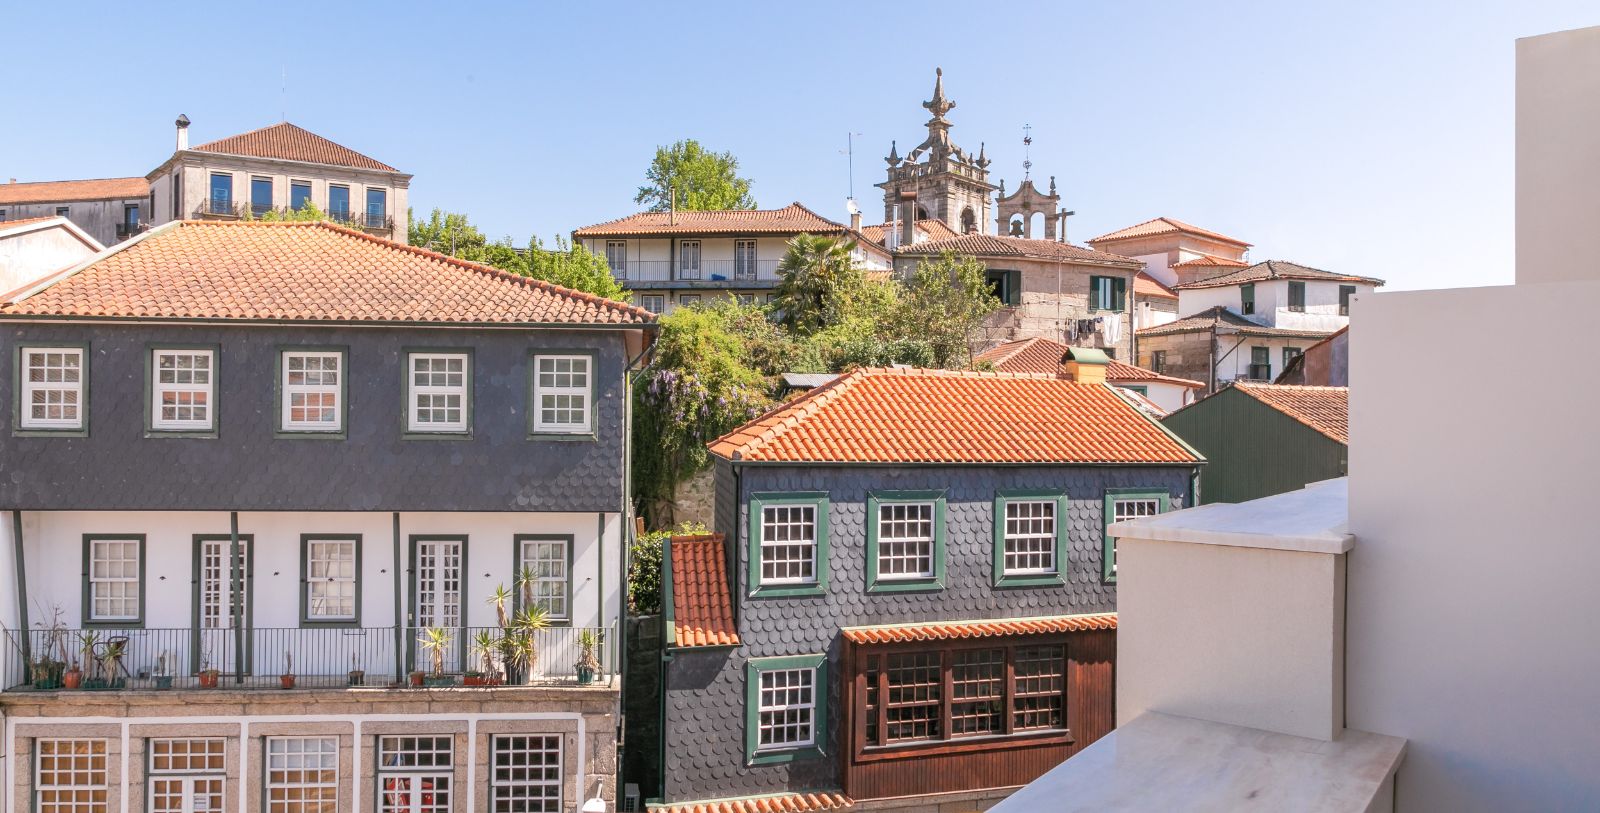 Discover poets and painters such as Teixeira de Pascoes and Amadeo de Souza Cardoso, who were inspired by the view from Casa das Lérias and its lush garden.